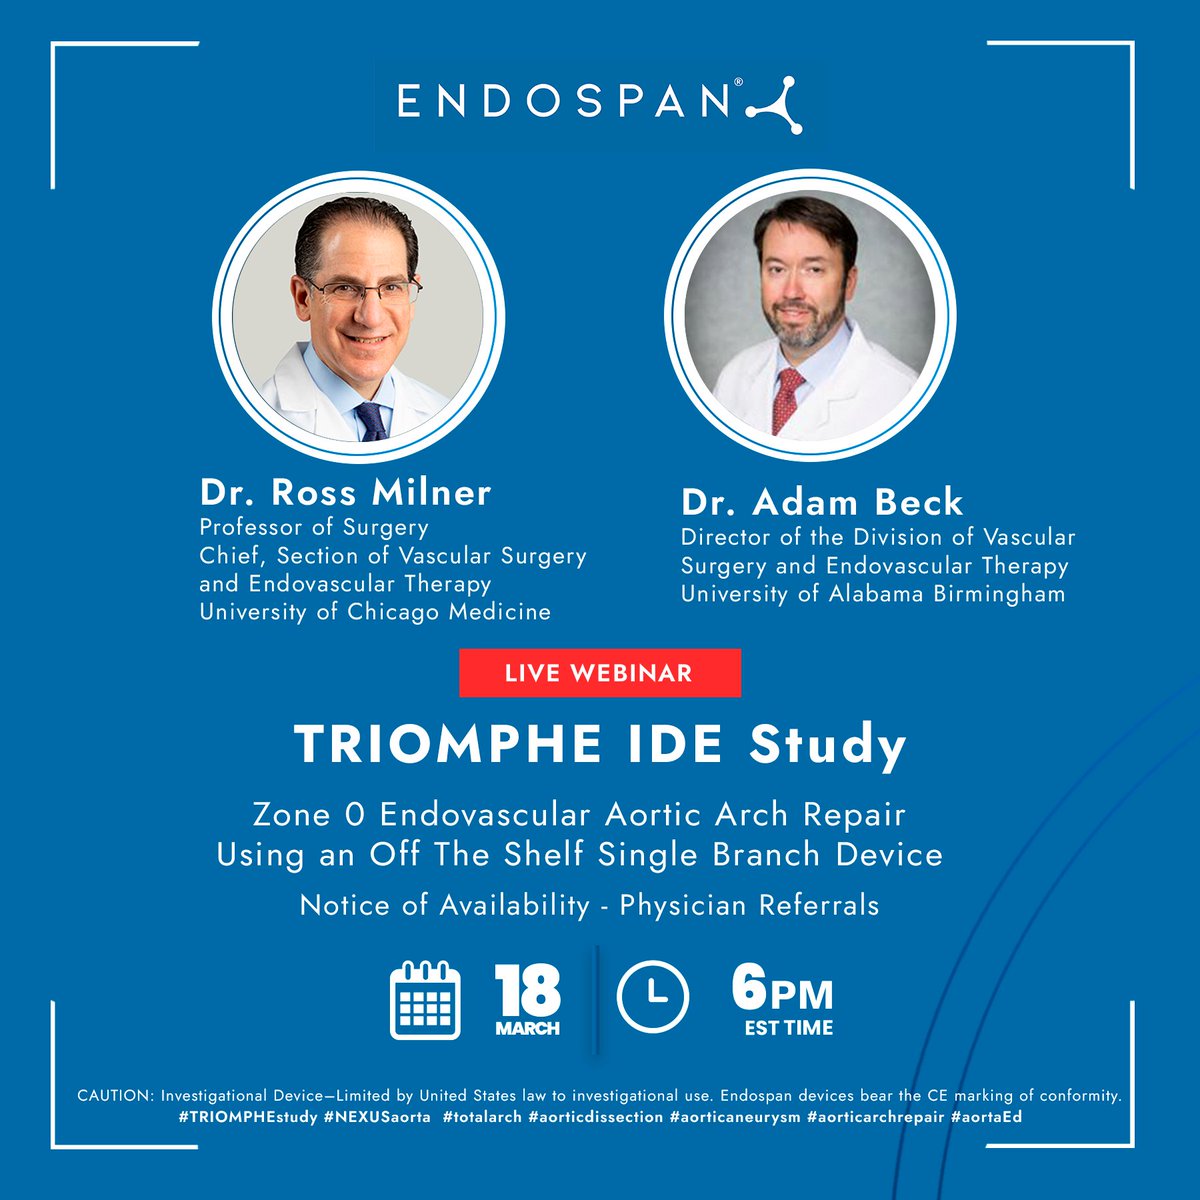 Don't miss the opportunity to learn from leading vascular surgery experts Dr. Ross Milner and Dr. Adam Beck. During this webinar, they will discuss the latest advancements in endovascular aortic arch repair.​ Register here: streamyard.com/watch/aRNjD2kg…